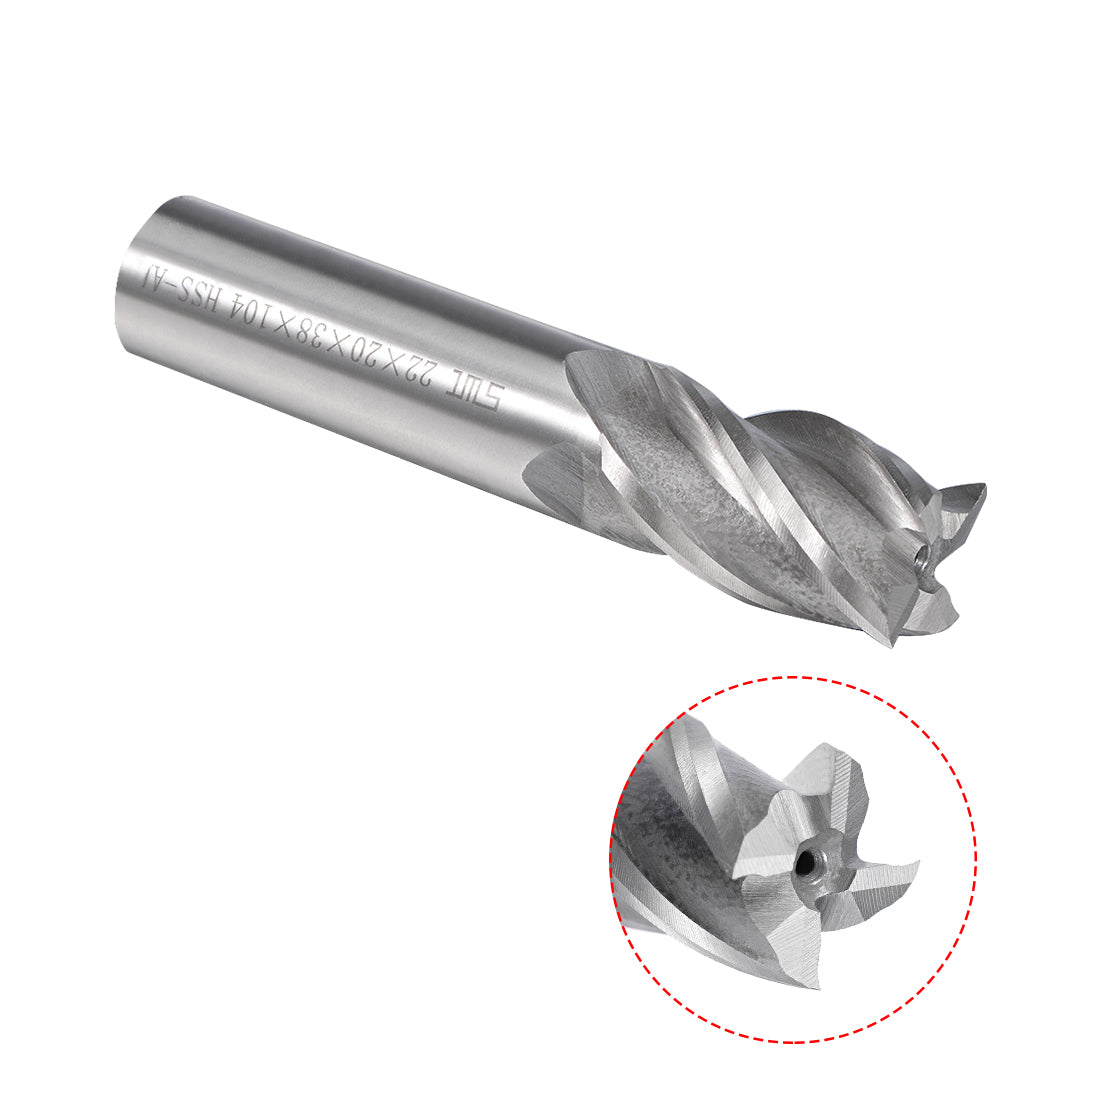 uxcell Uxcell High Speed Steel HSS-AL 4 Flute Straight End Mill Cutter CNC Router Bits, 22 x 20 x 38mm